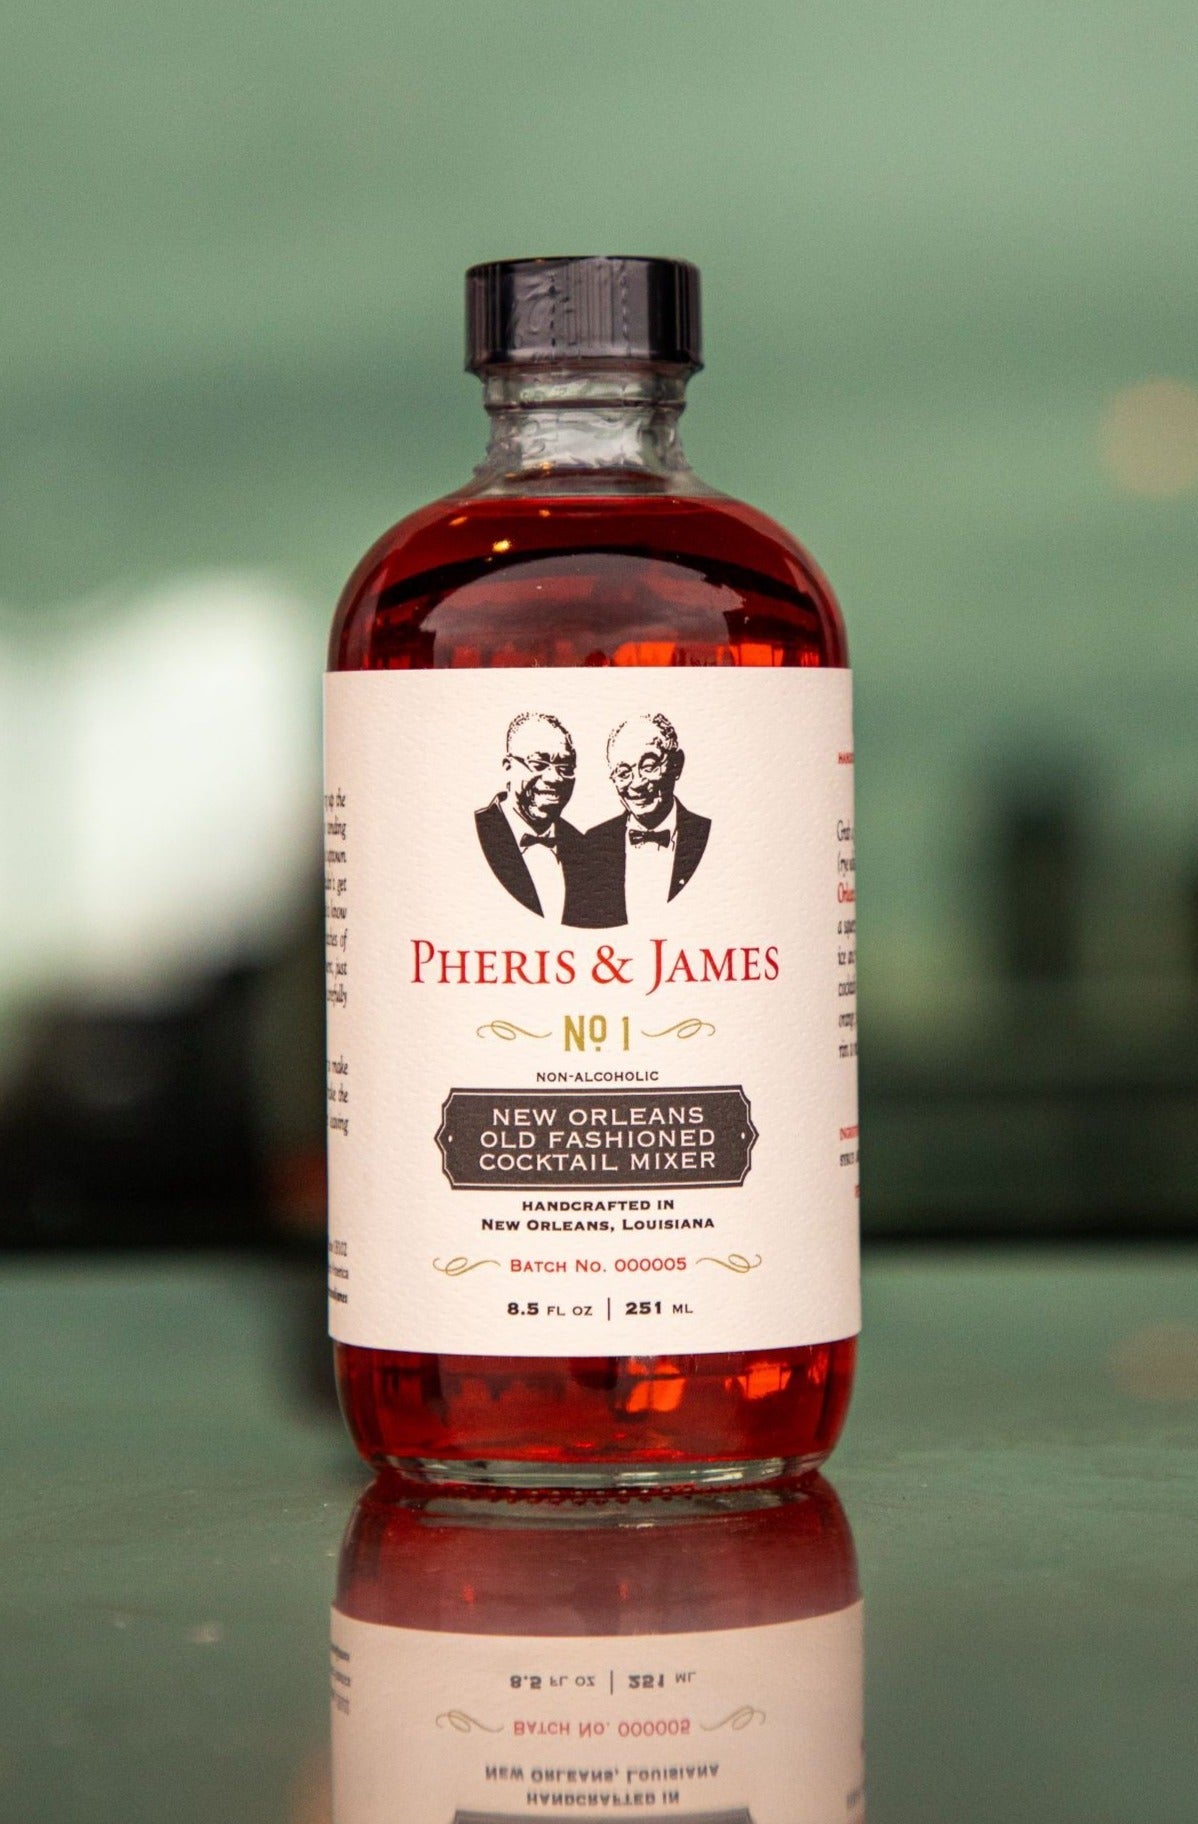 Pheris and James, Authentic New Orleans old fashioned mix